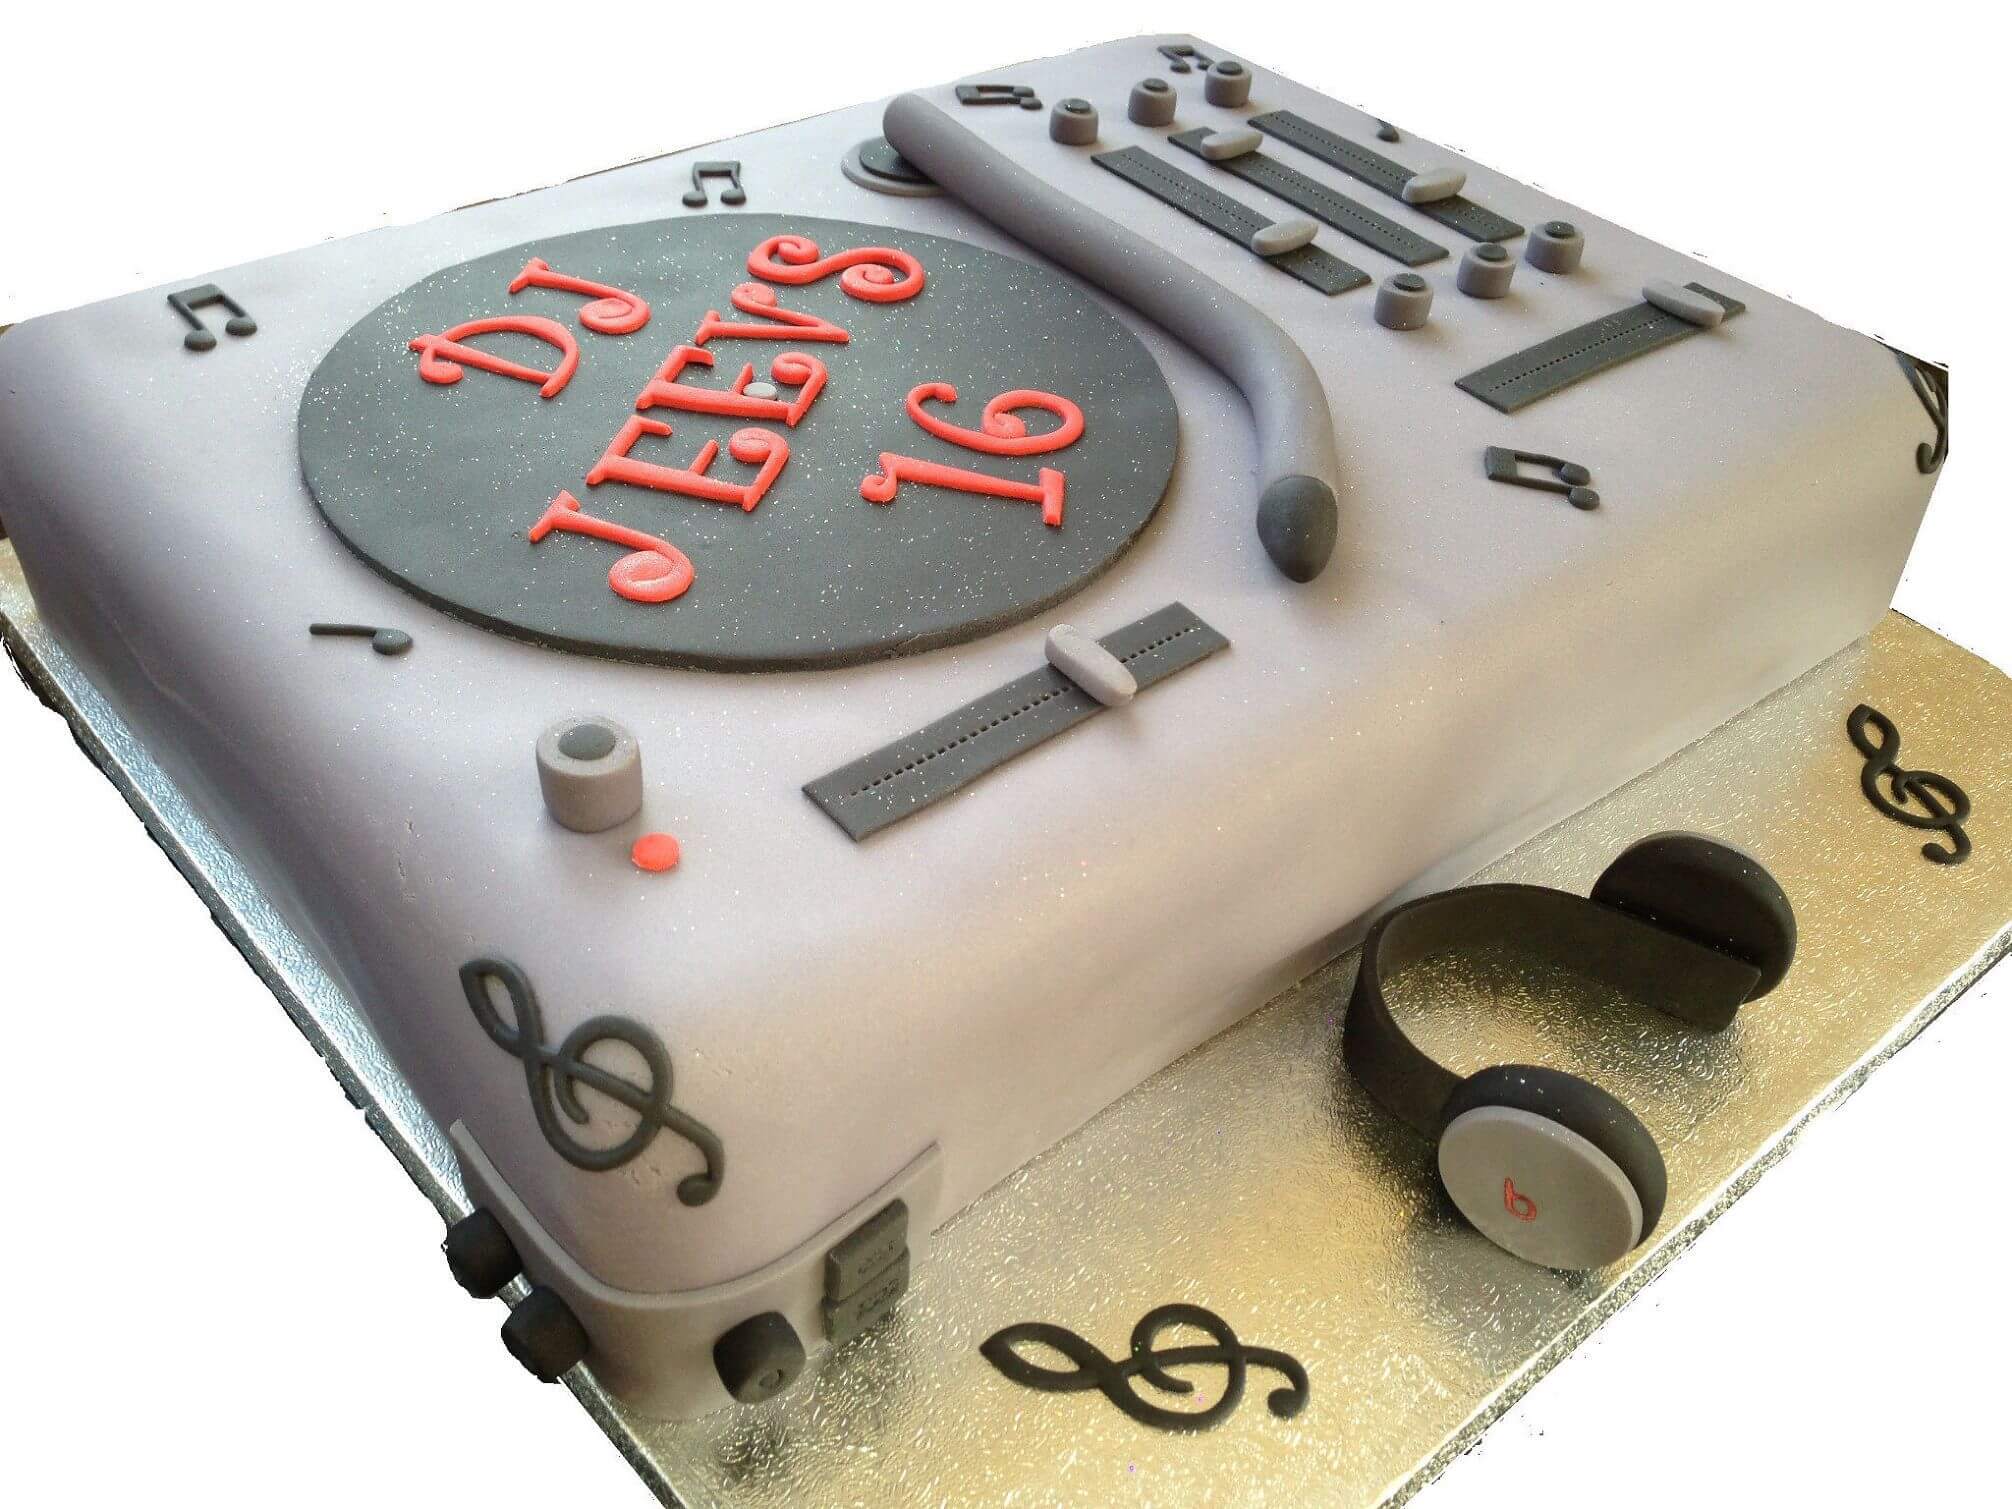 DJ designer cake online, online DJ designer cake delivery